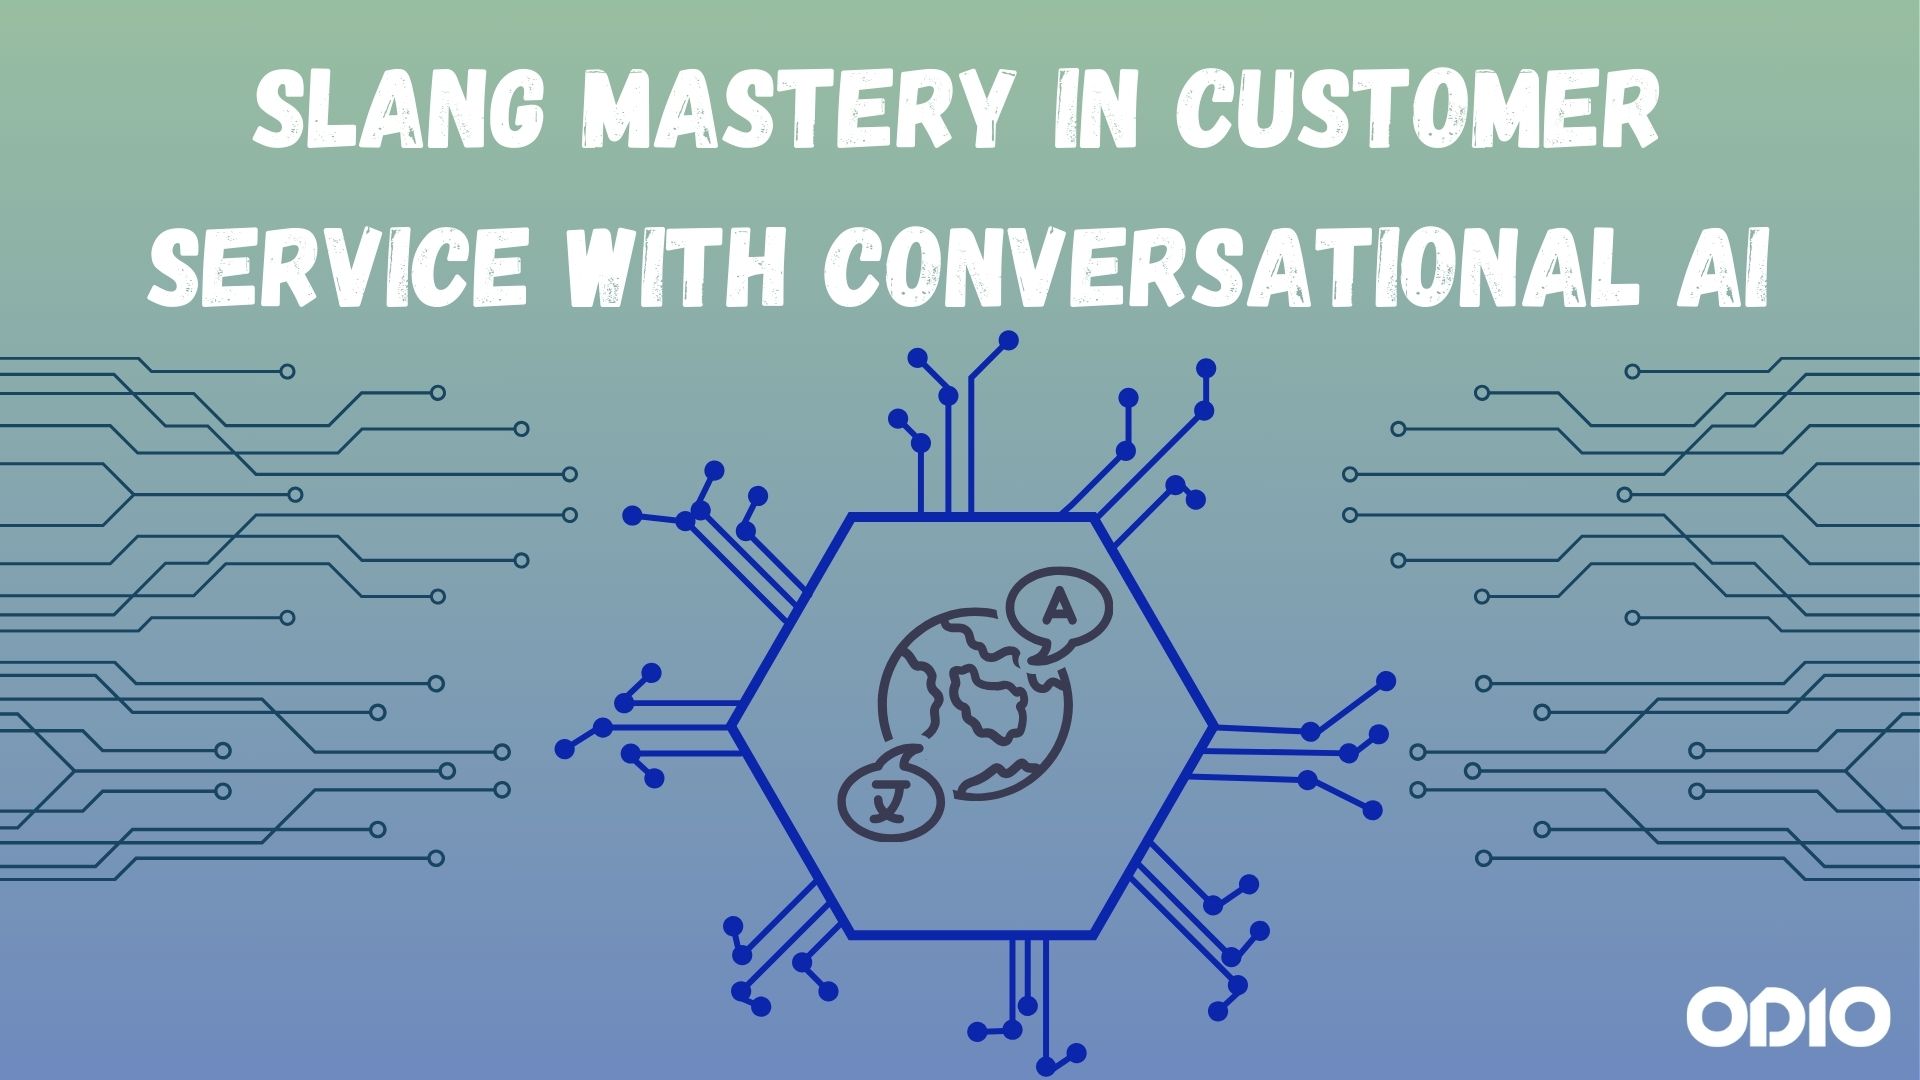 Slang Mastery in Customer Service with Conversational AI